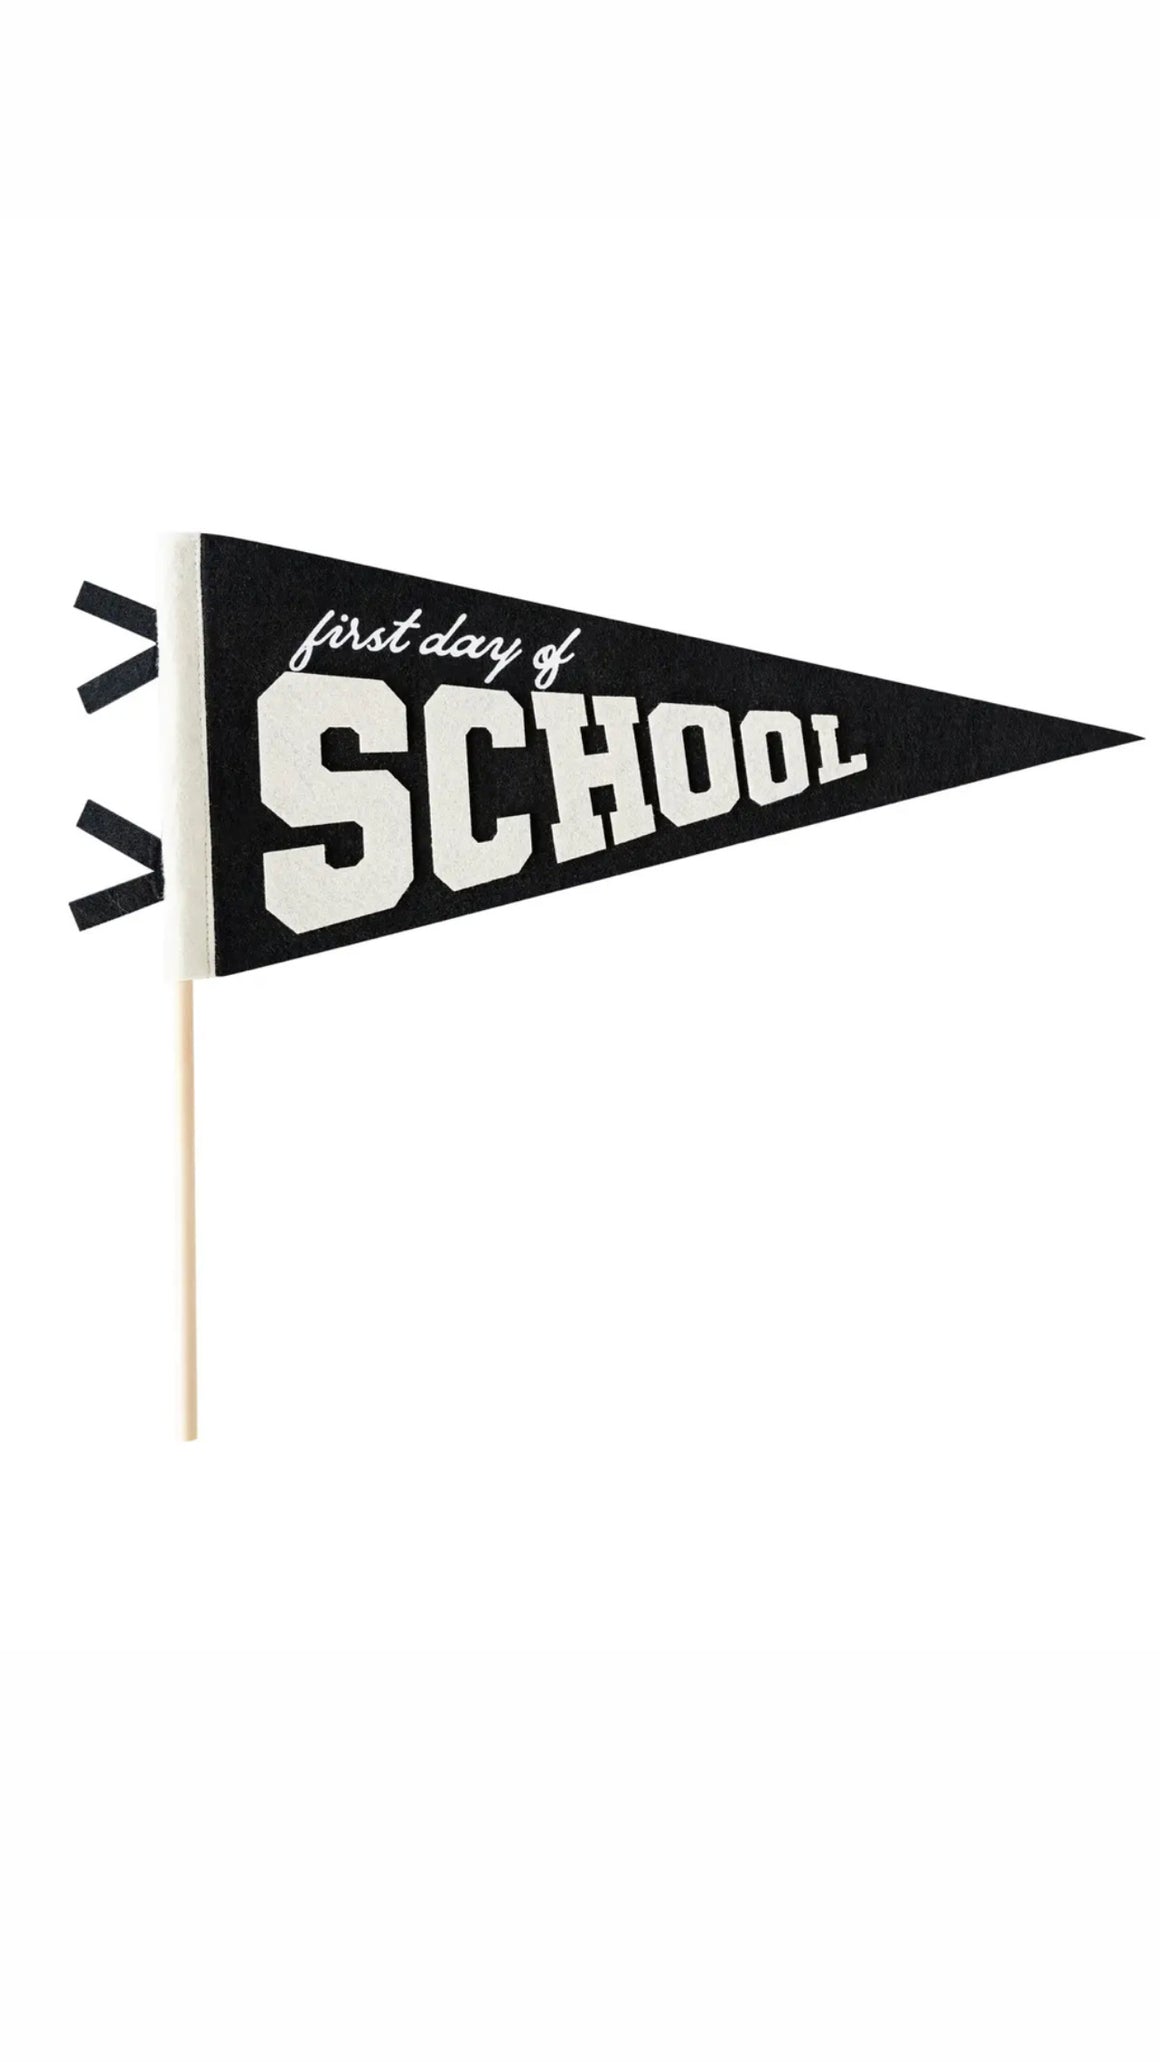 DECORATION - FIRST DAY OF SCHOOL PENNANT BLACK